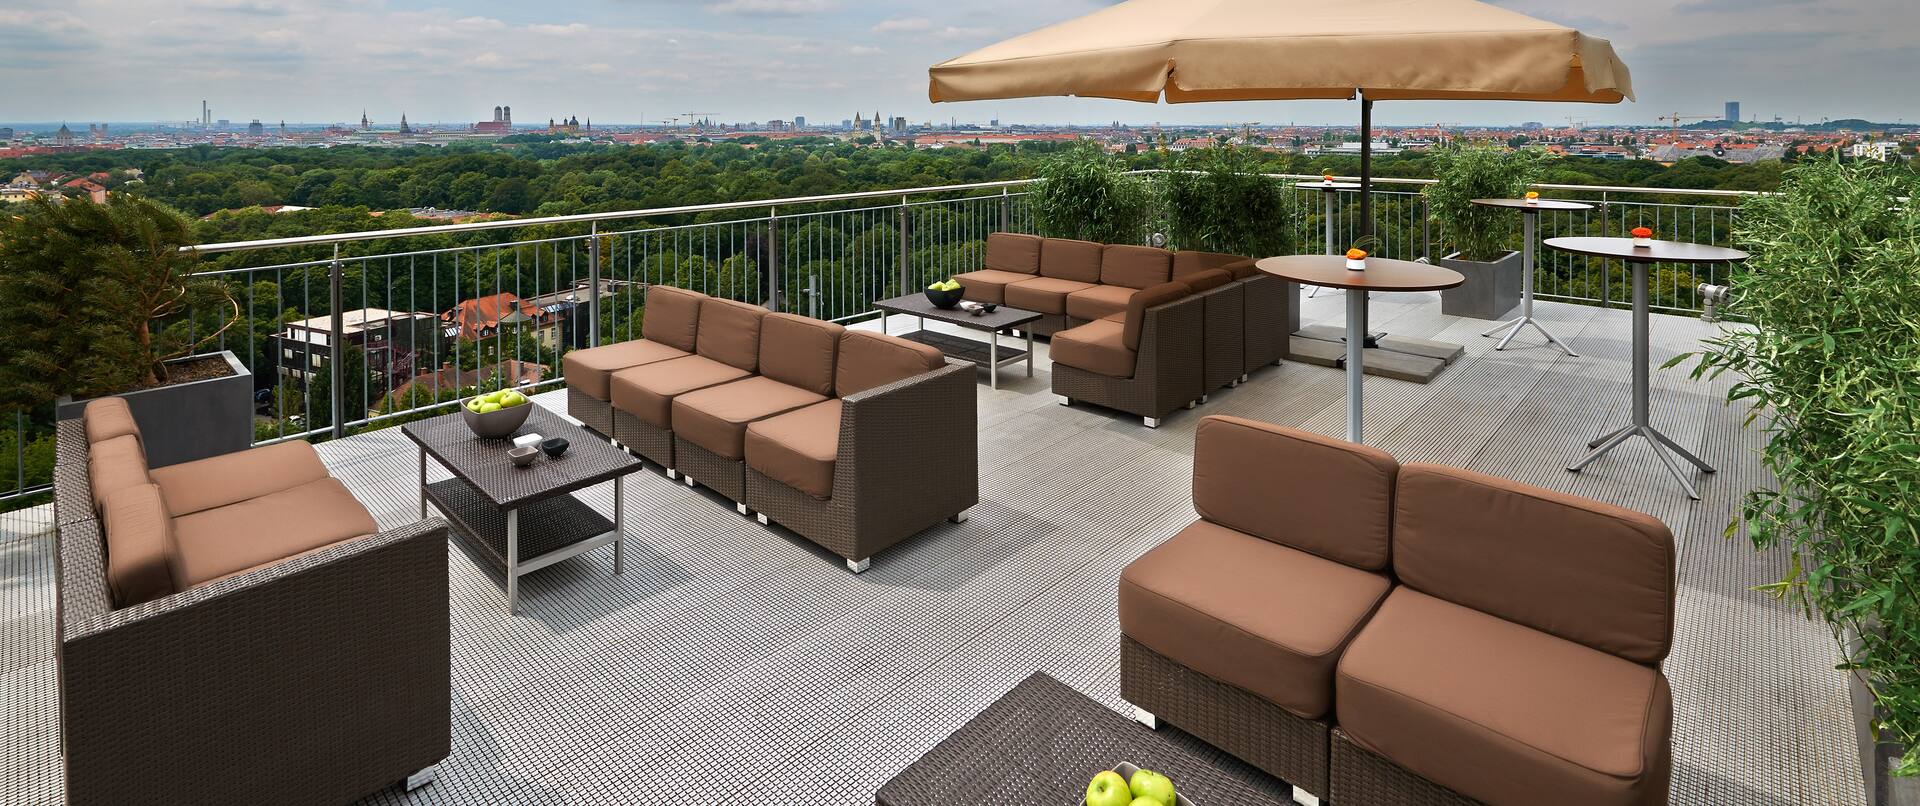 Roof66 - Lounge Area